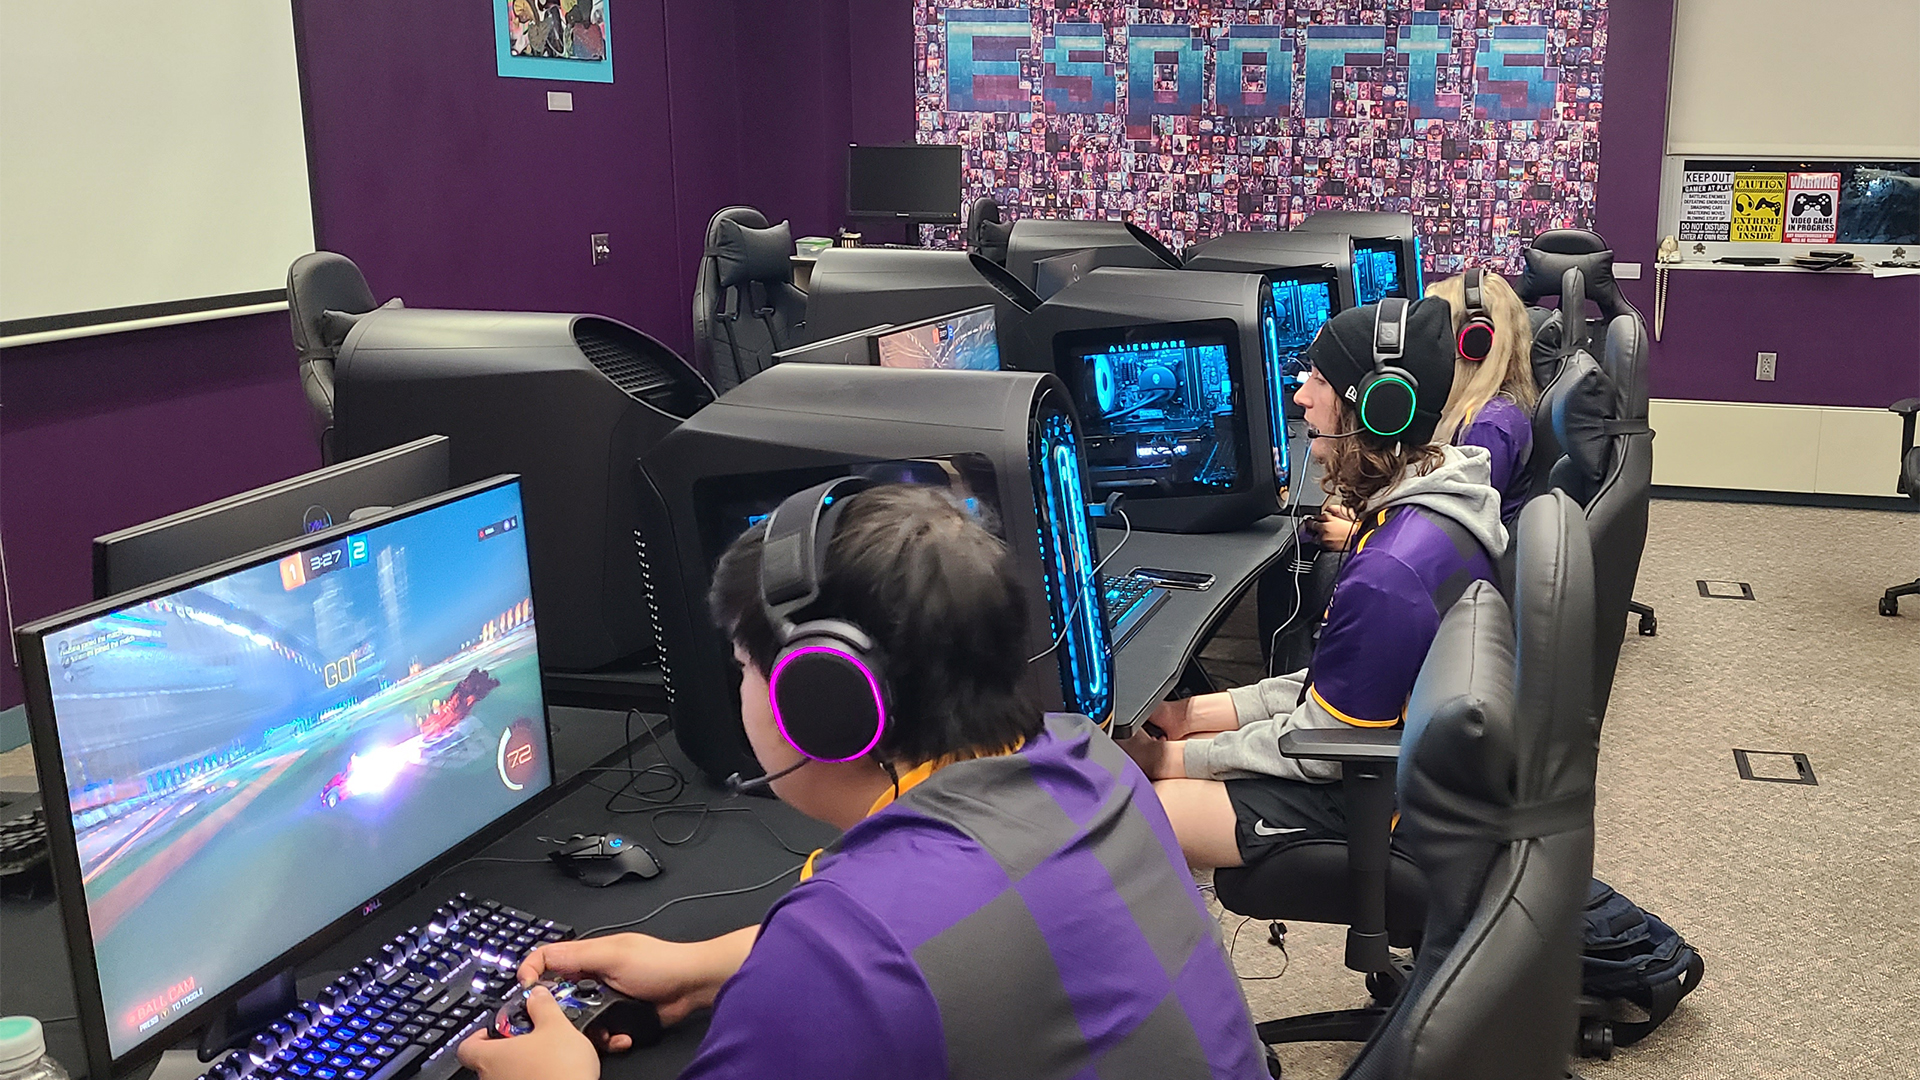 The Rocket League team competing inside the esports facility. Photo by Karina Graziani.